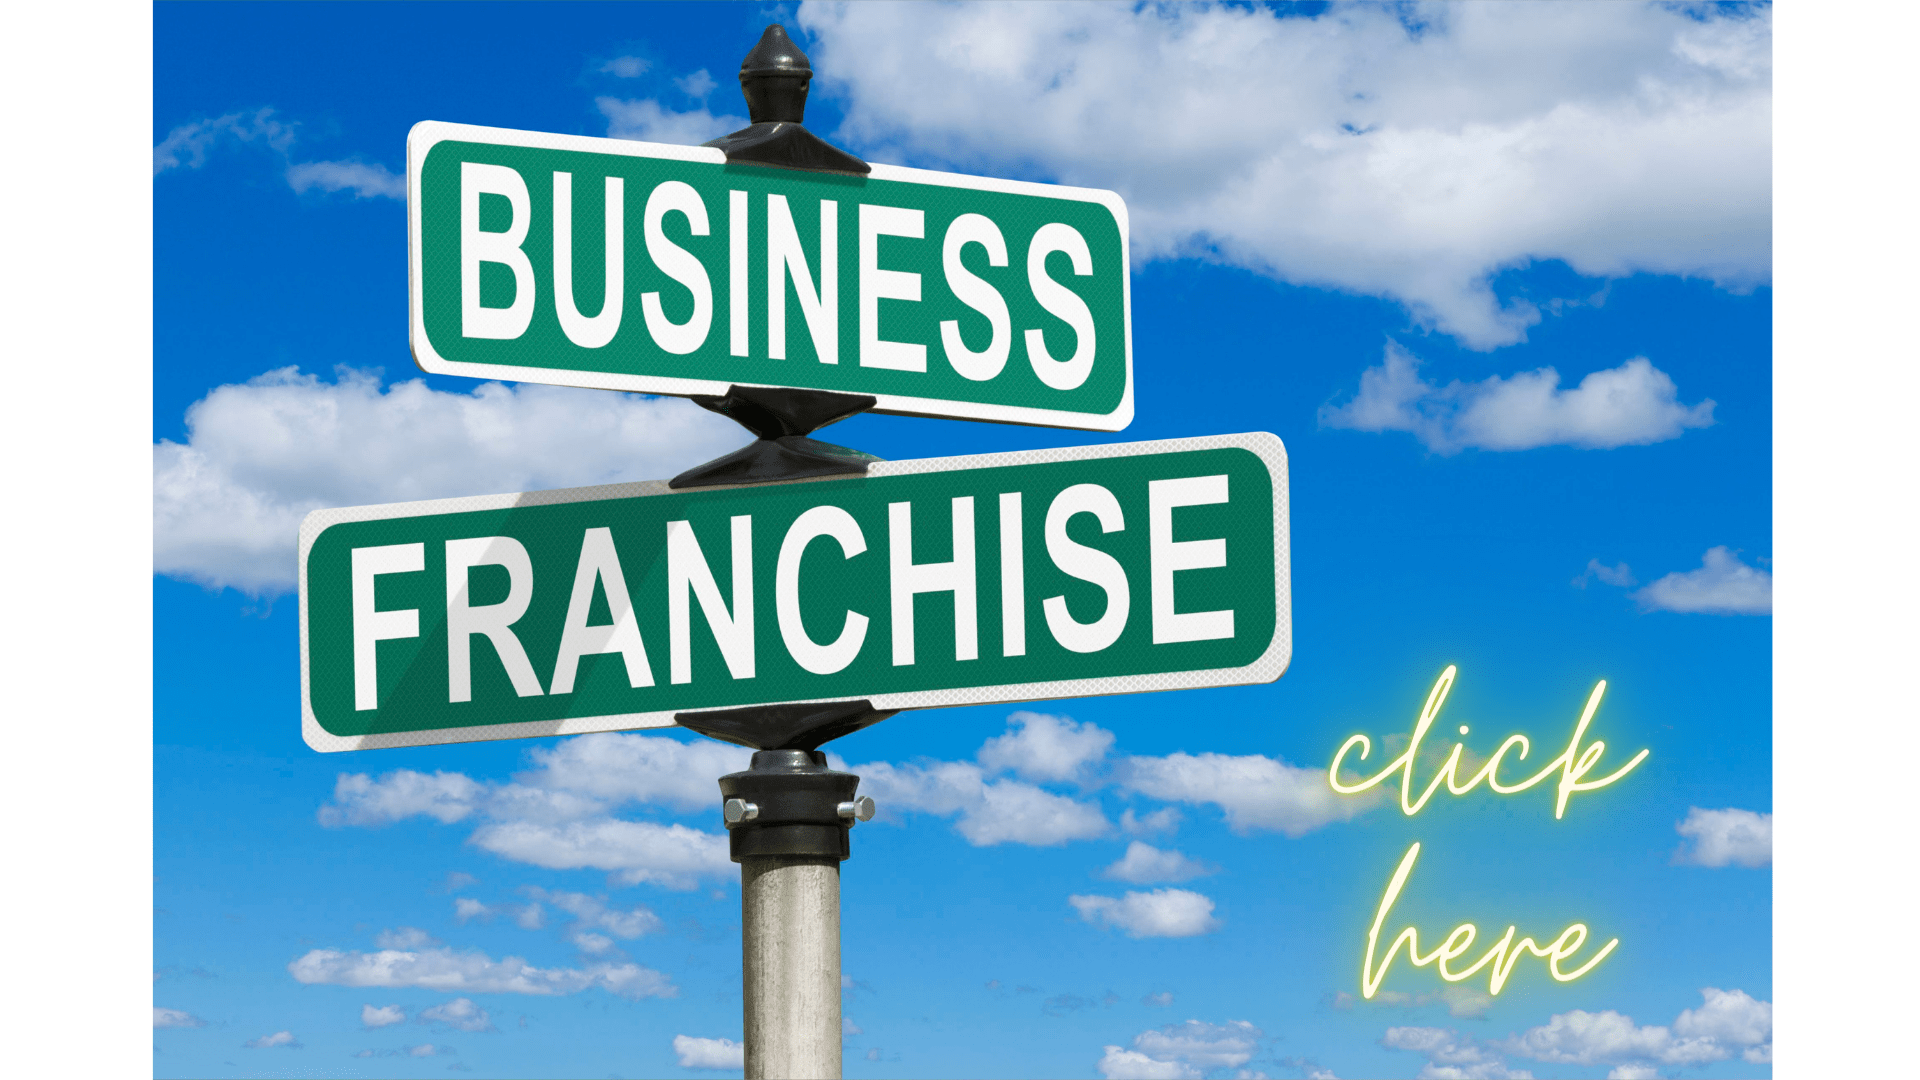 Starting a franchise? Click here